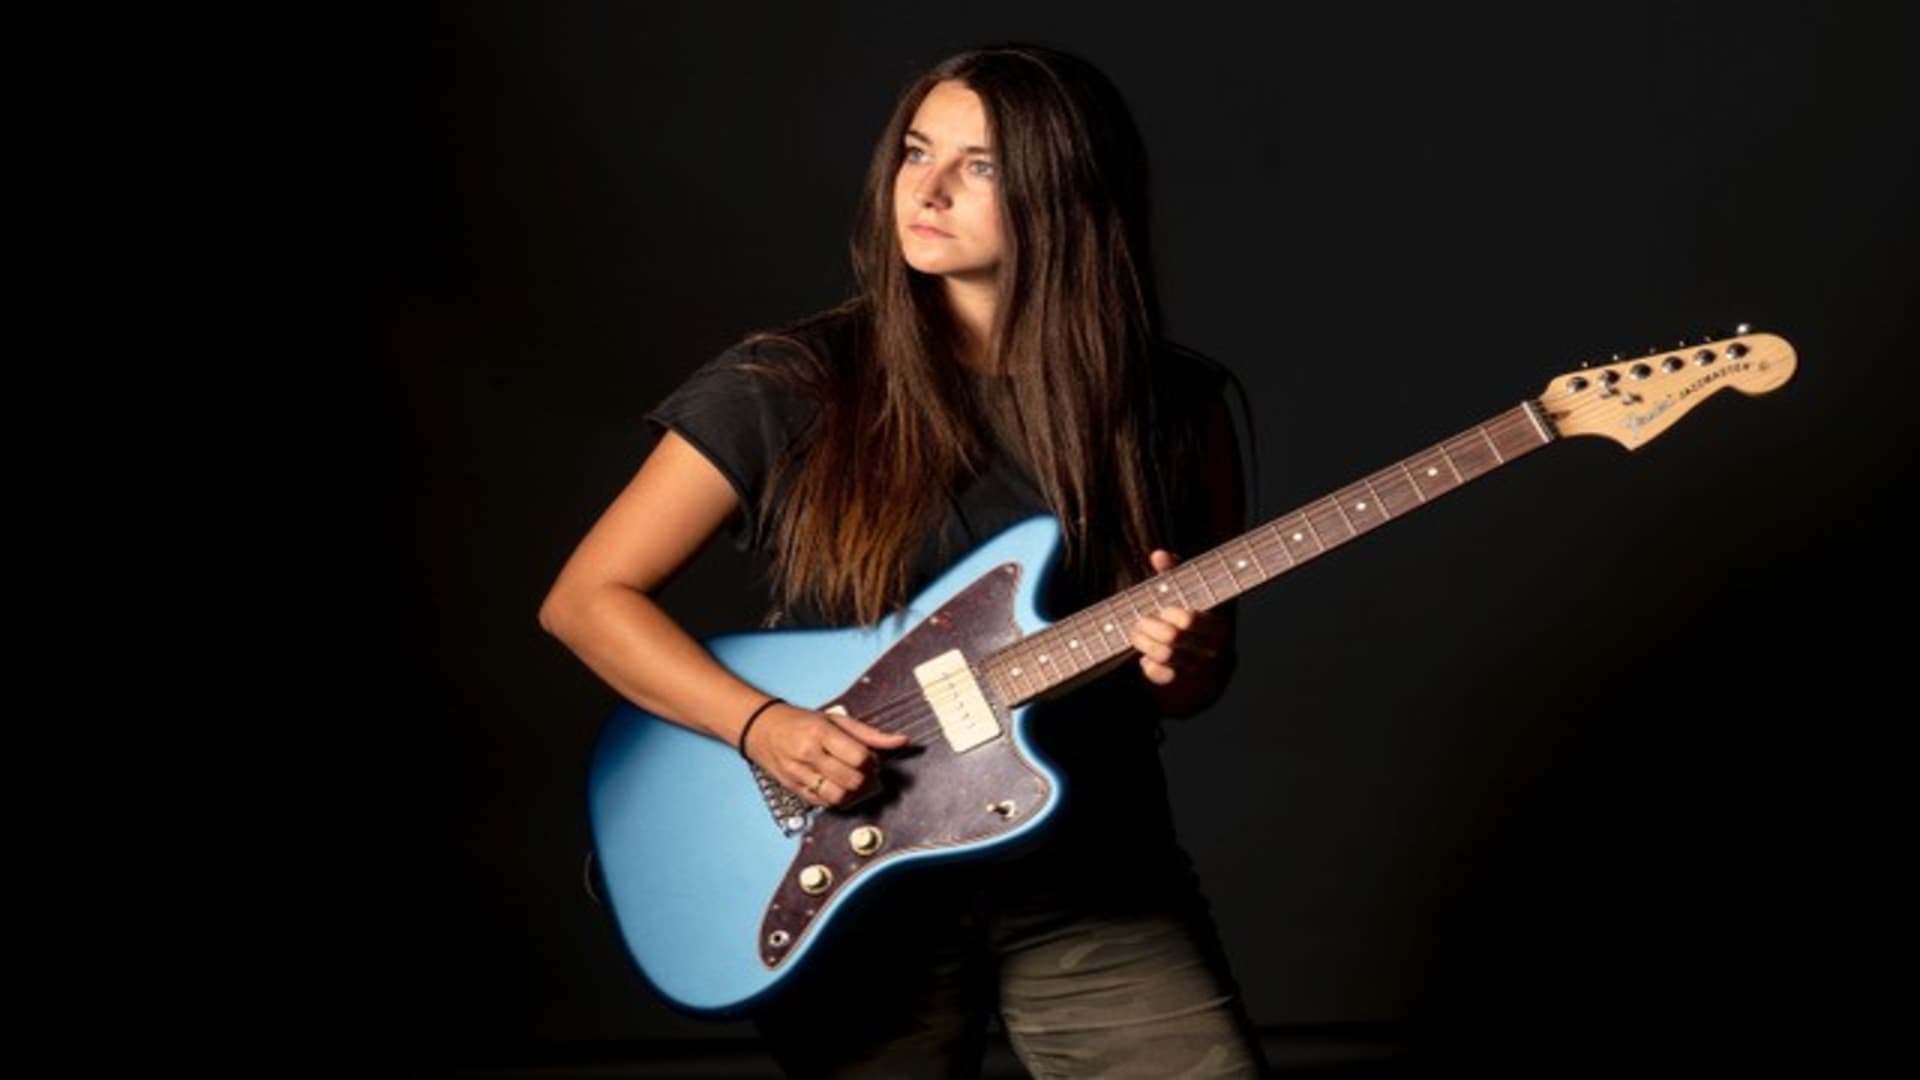 Fender helps spawn new artists like Katie Pruitt, an up-and-coming songwriter and vocalist.